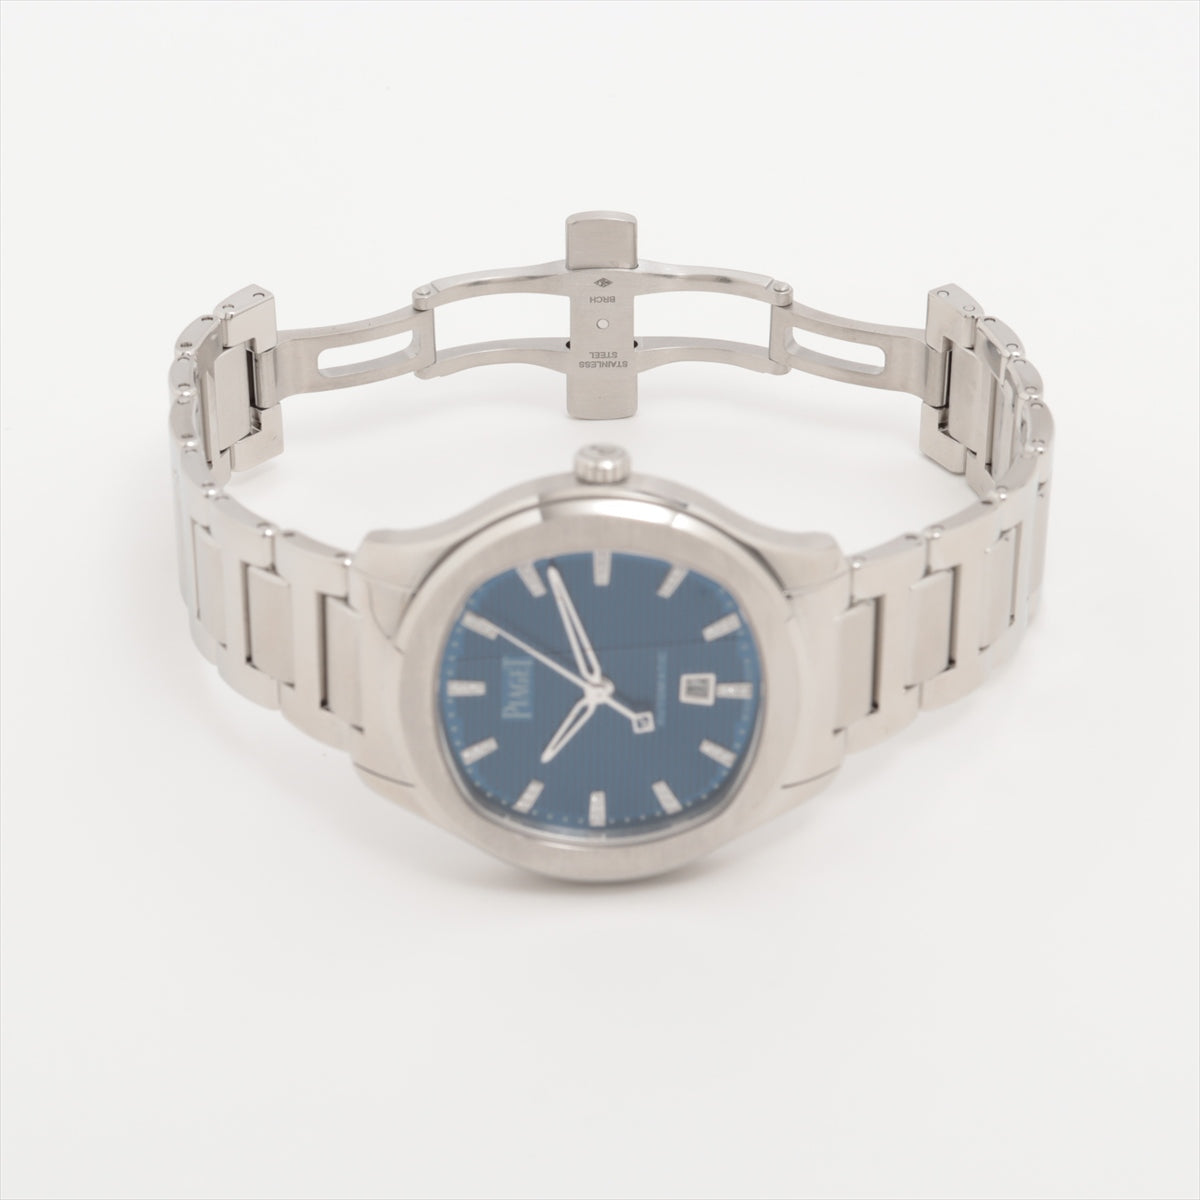 Piaget Polo G0A46018 SS AT Blue-Face Extra Link 2